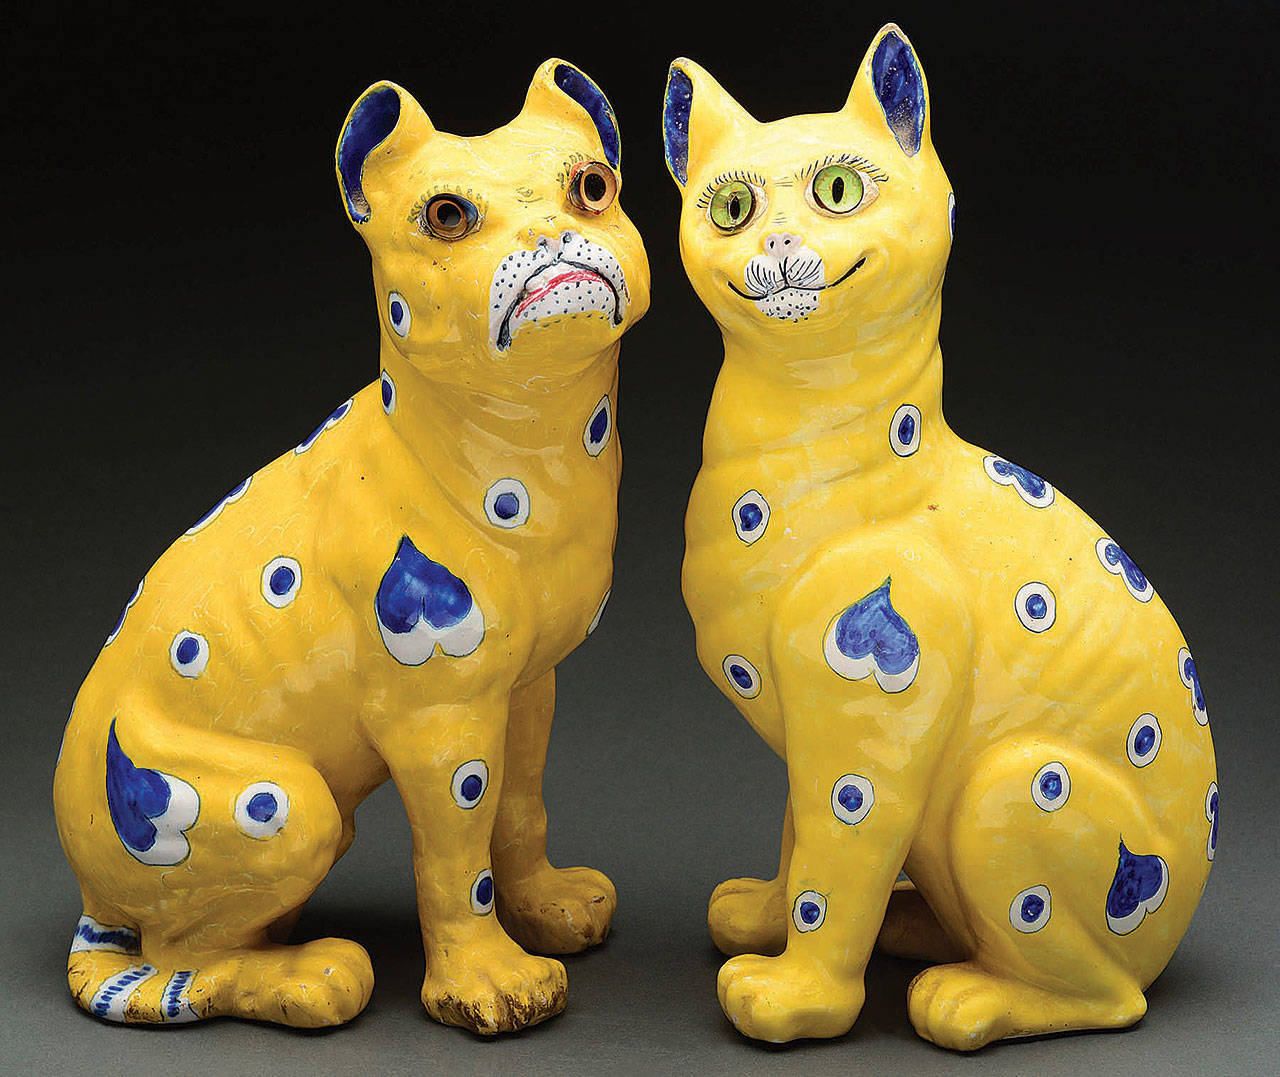 Emile Galle was a famous French artist who is best known for cameo glass vases. He also made important furniture and pottery that delights today’s collectors. These faience figurines, a bulldog and a cat, sold at auction as a pair for $1,470. Every cat has a silly grin and glass eyes, so they are easy to recognize. (Cowles Syndicate Inc.)